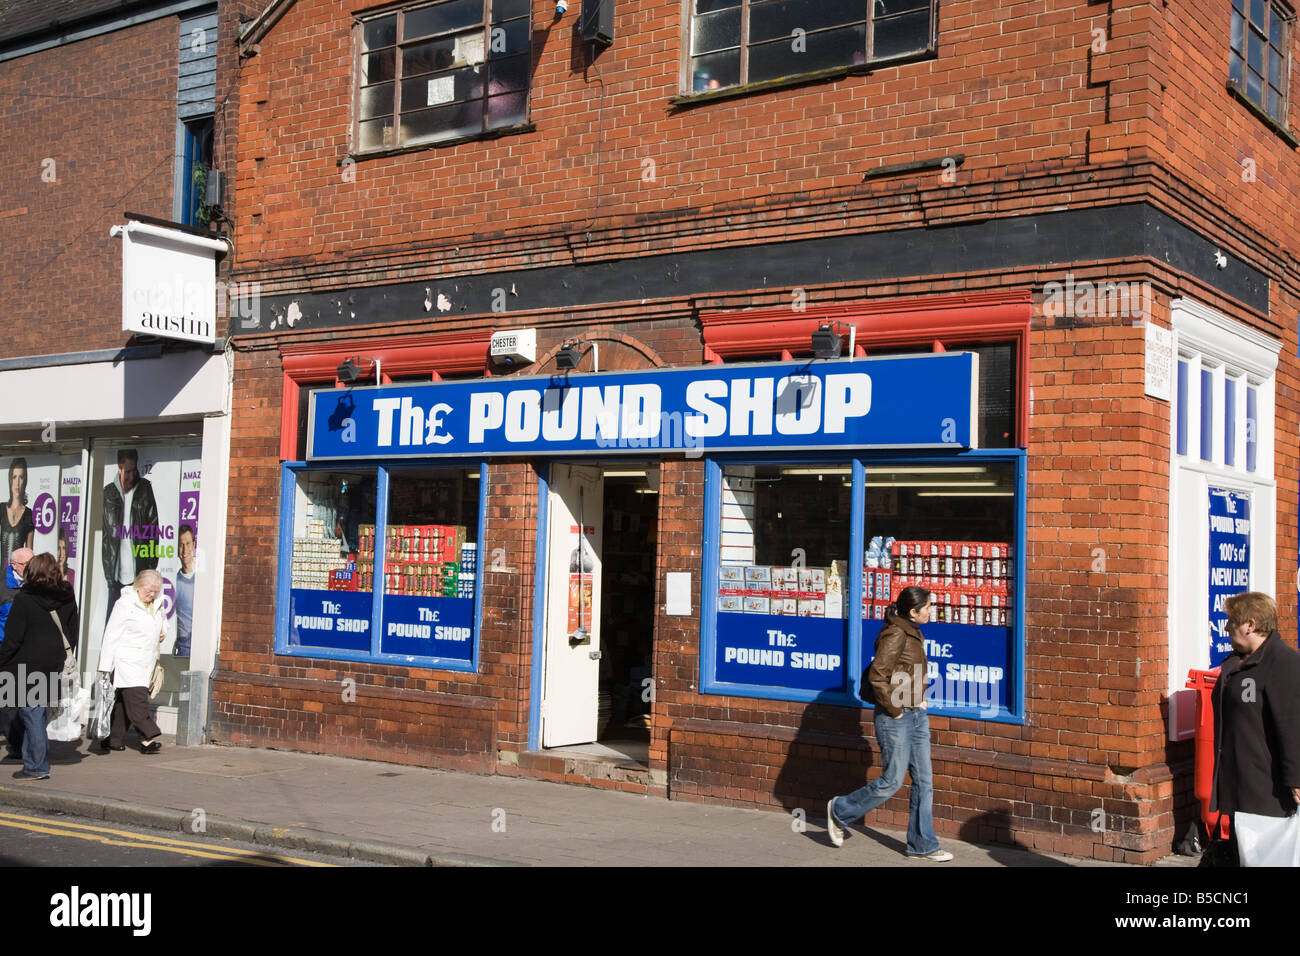 The Pound Shop in shopping area of Chester,Cheshire,England,United Kingdom,Europe Stock Photo